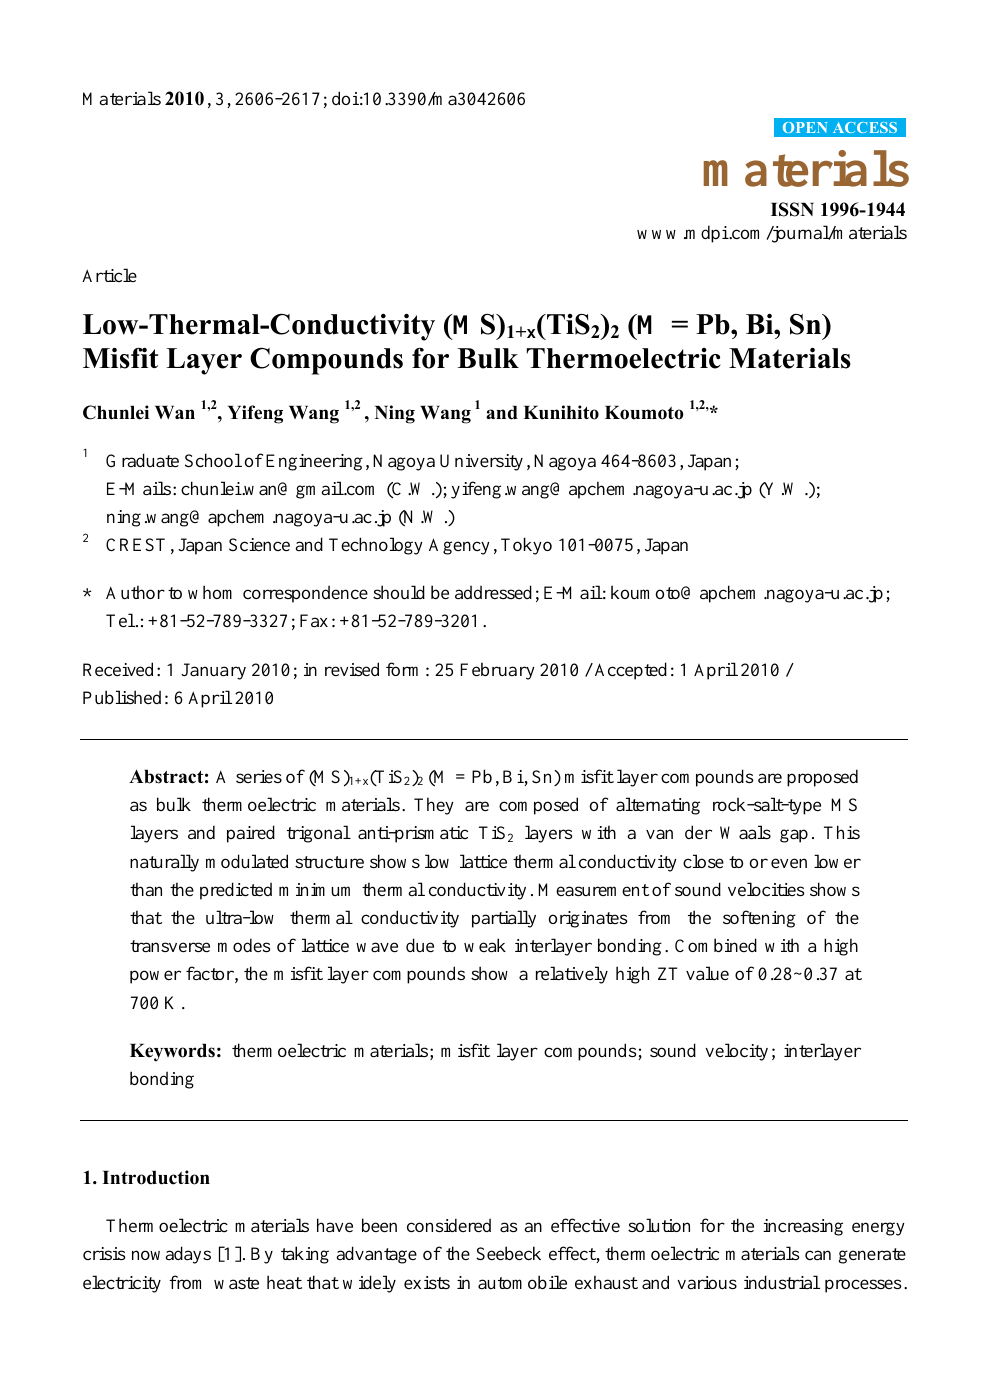 Low Thermal Conductivity Ms 1 X Tis2 2 M Pb Bi Sn Misfit Layer Compounds For Bulk Thermoelectric Materials Topic Of Research Paper In Nano Technology Download Scholarly Article Pdf And Read For Free On Cyberleninka Open